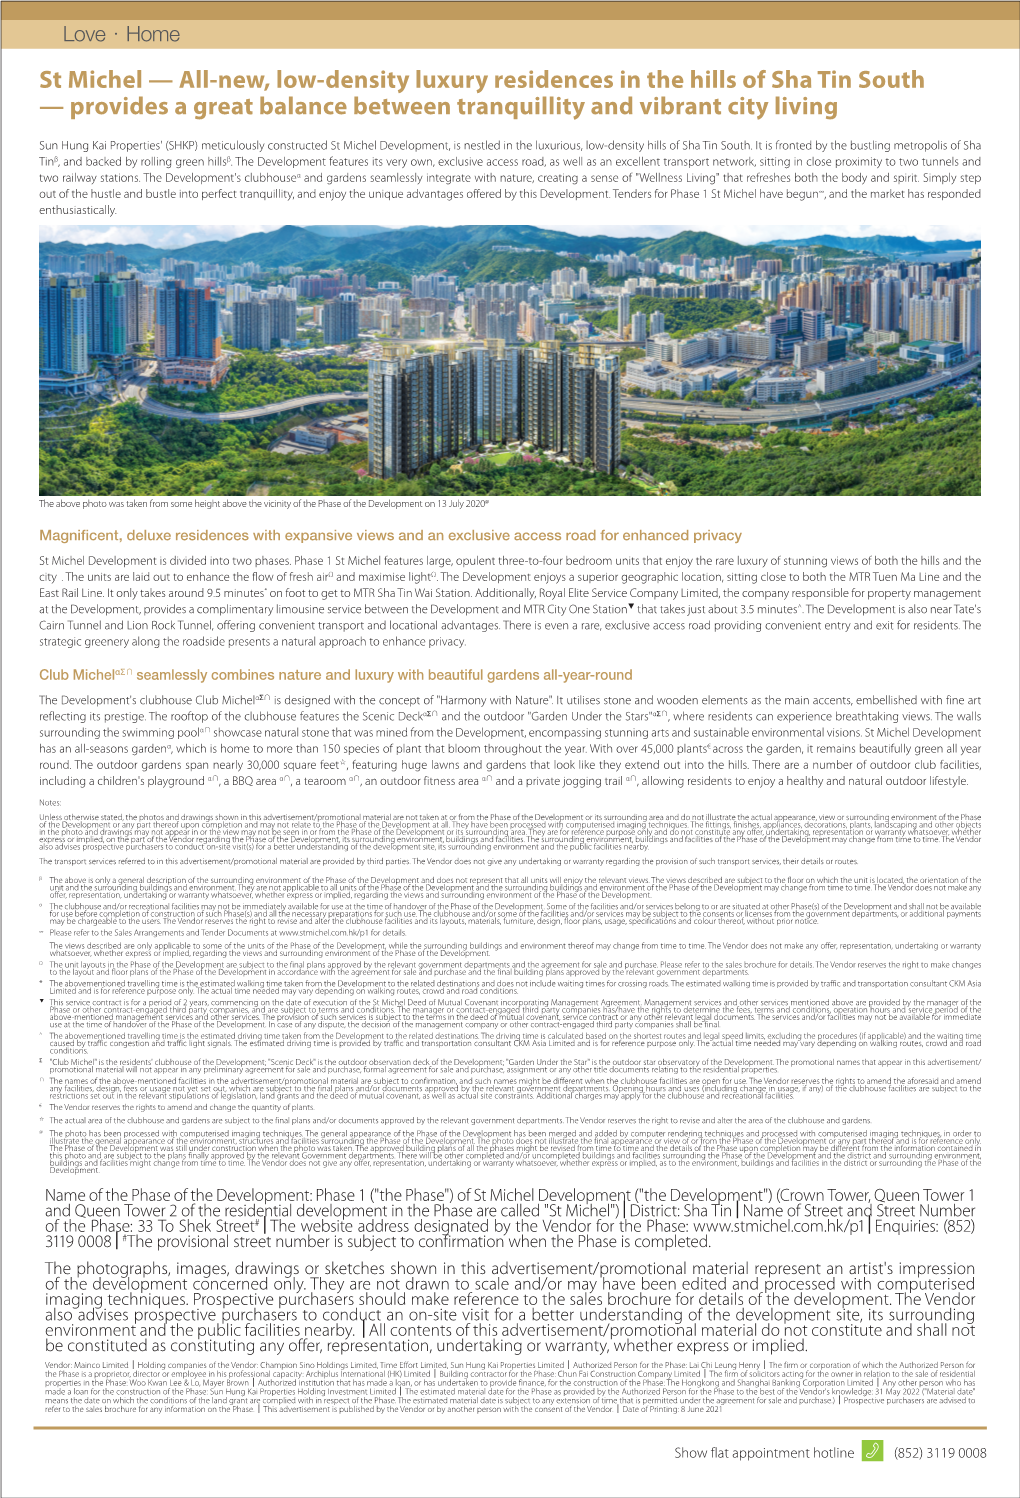 St Michel — All-New, Low-Density Luxury Residences in the Hills of Sha Tin South — Provides a Great Balance Between Tranquillity and Vibrant City Living